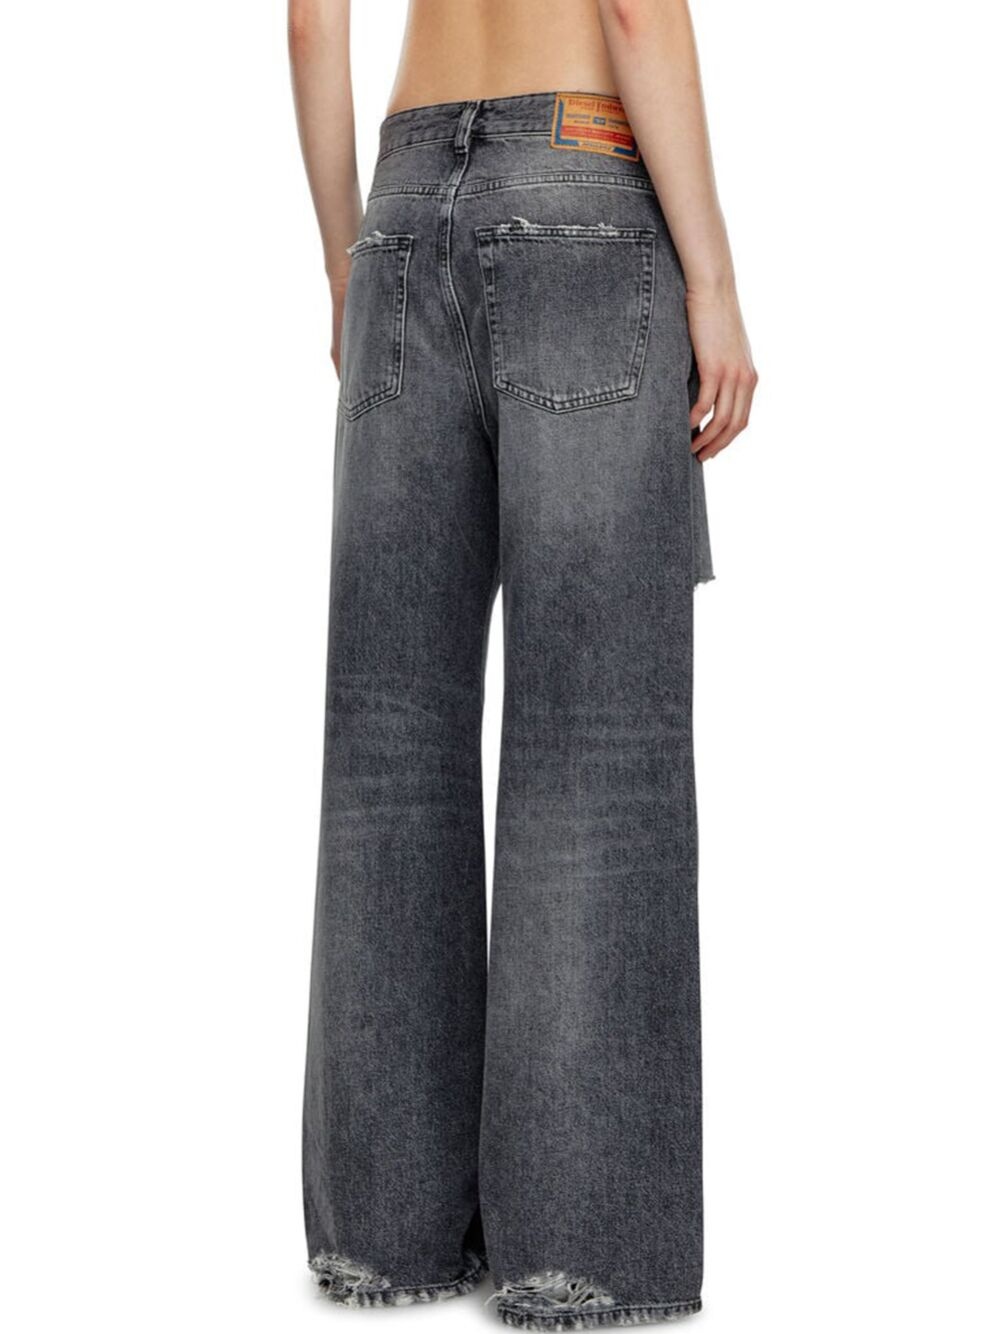 Straight jeans 1996 d-sire 007x4 - 4